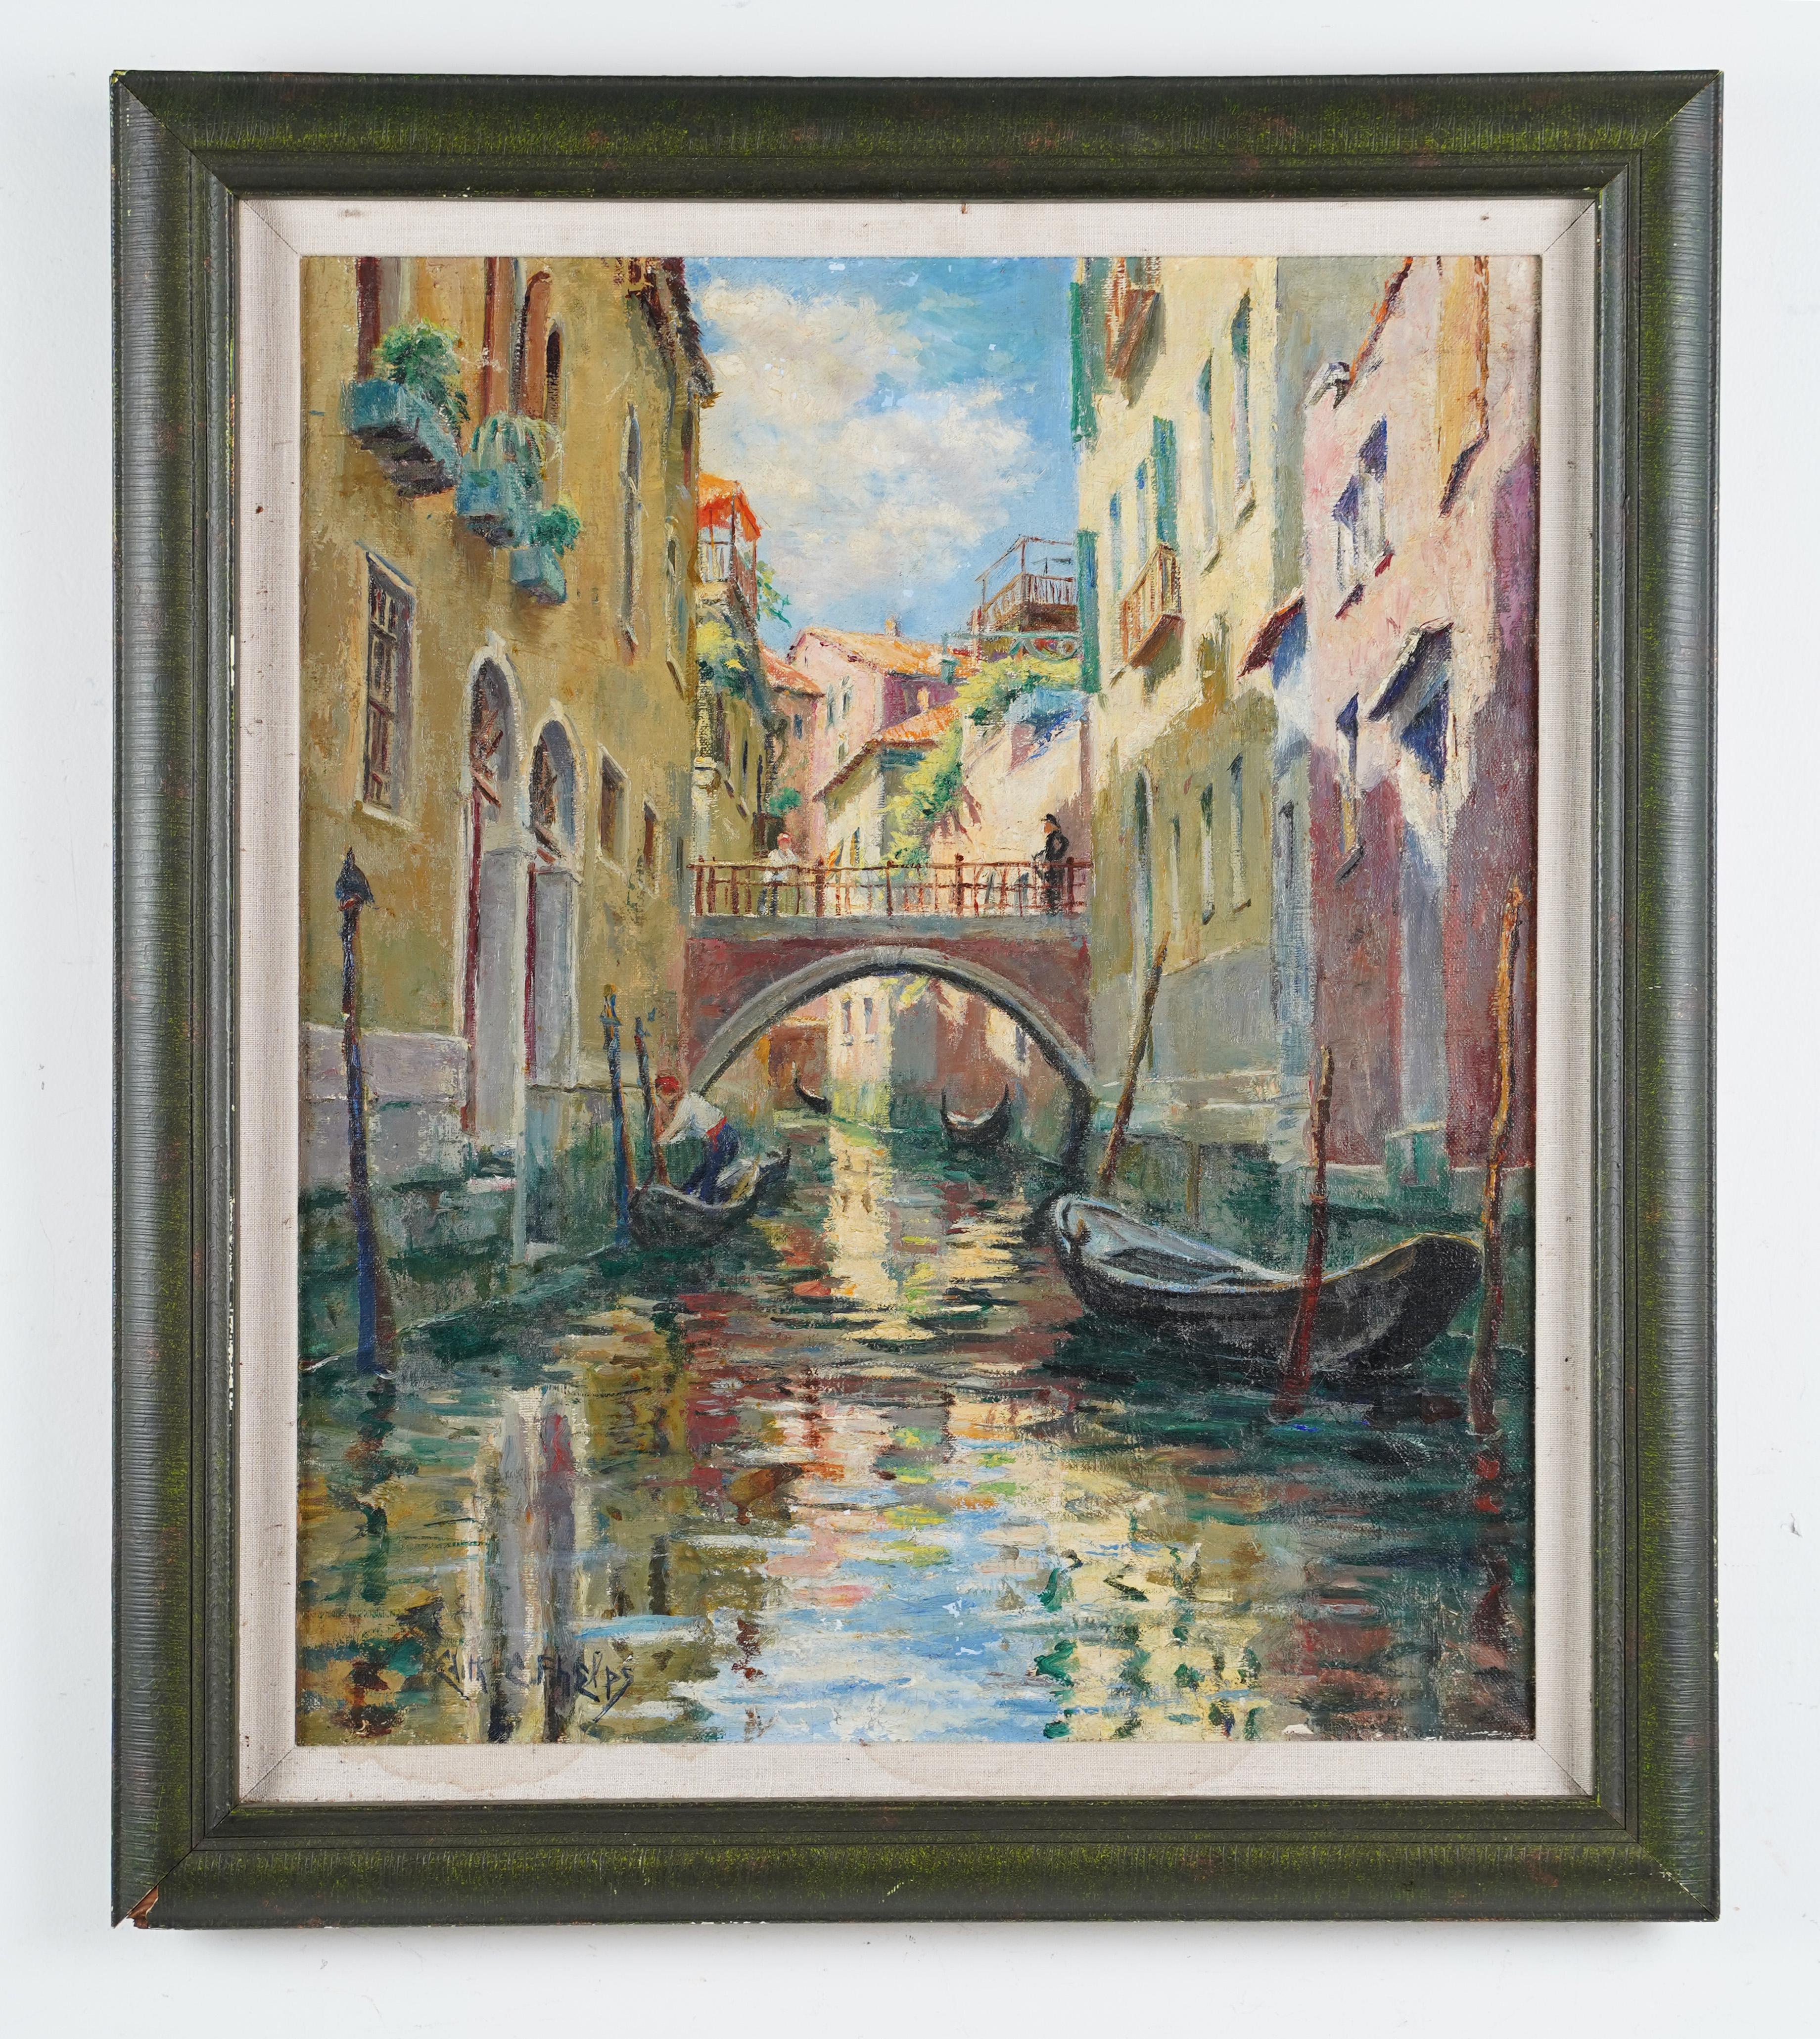 Antique American Female Impressionist Venice Italy Signed Cityscape Oil Painting - Gray Landscape Painting by Edith Catlin (Stowe) Phelps